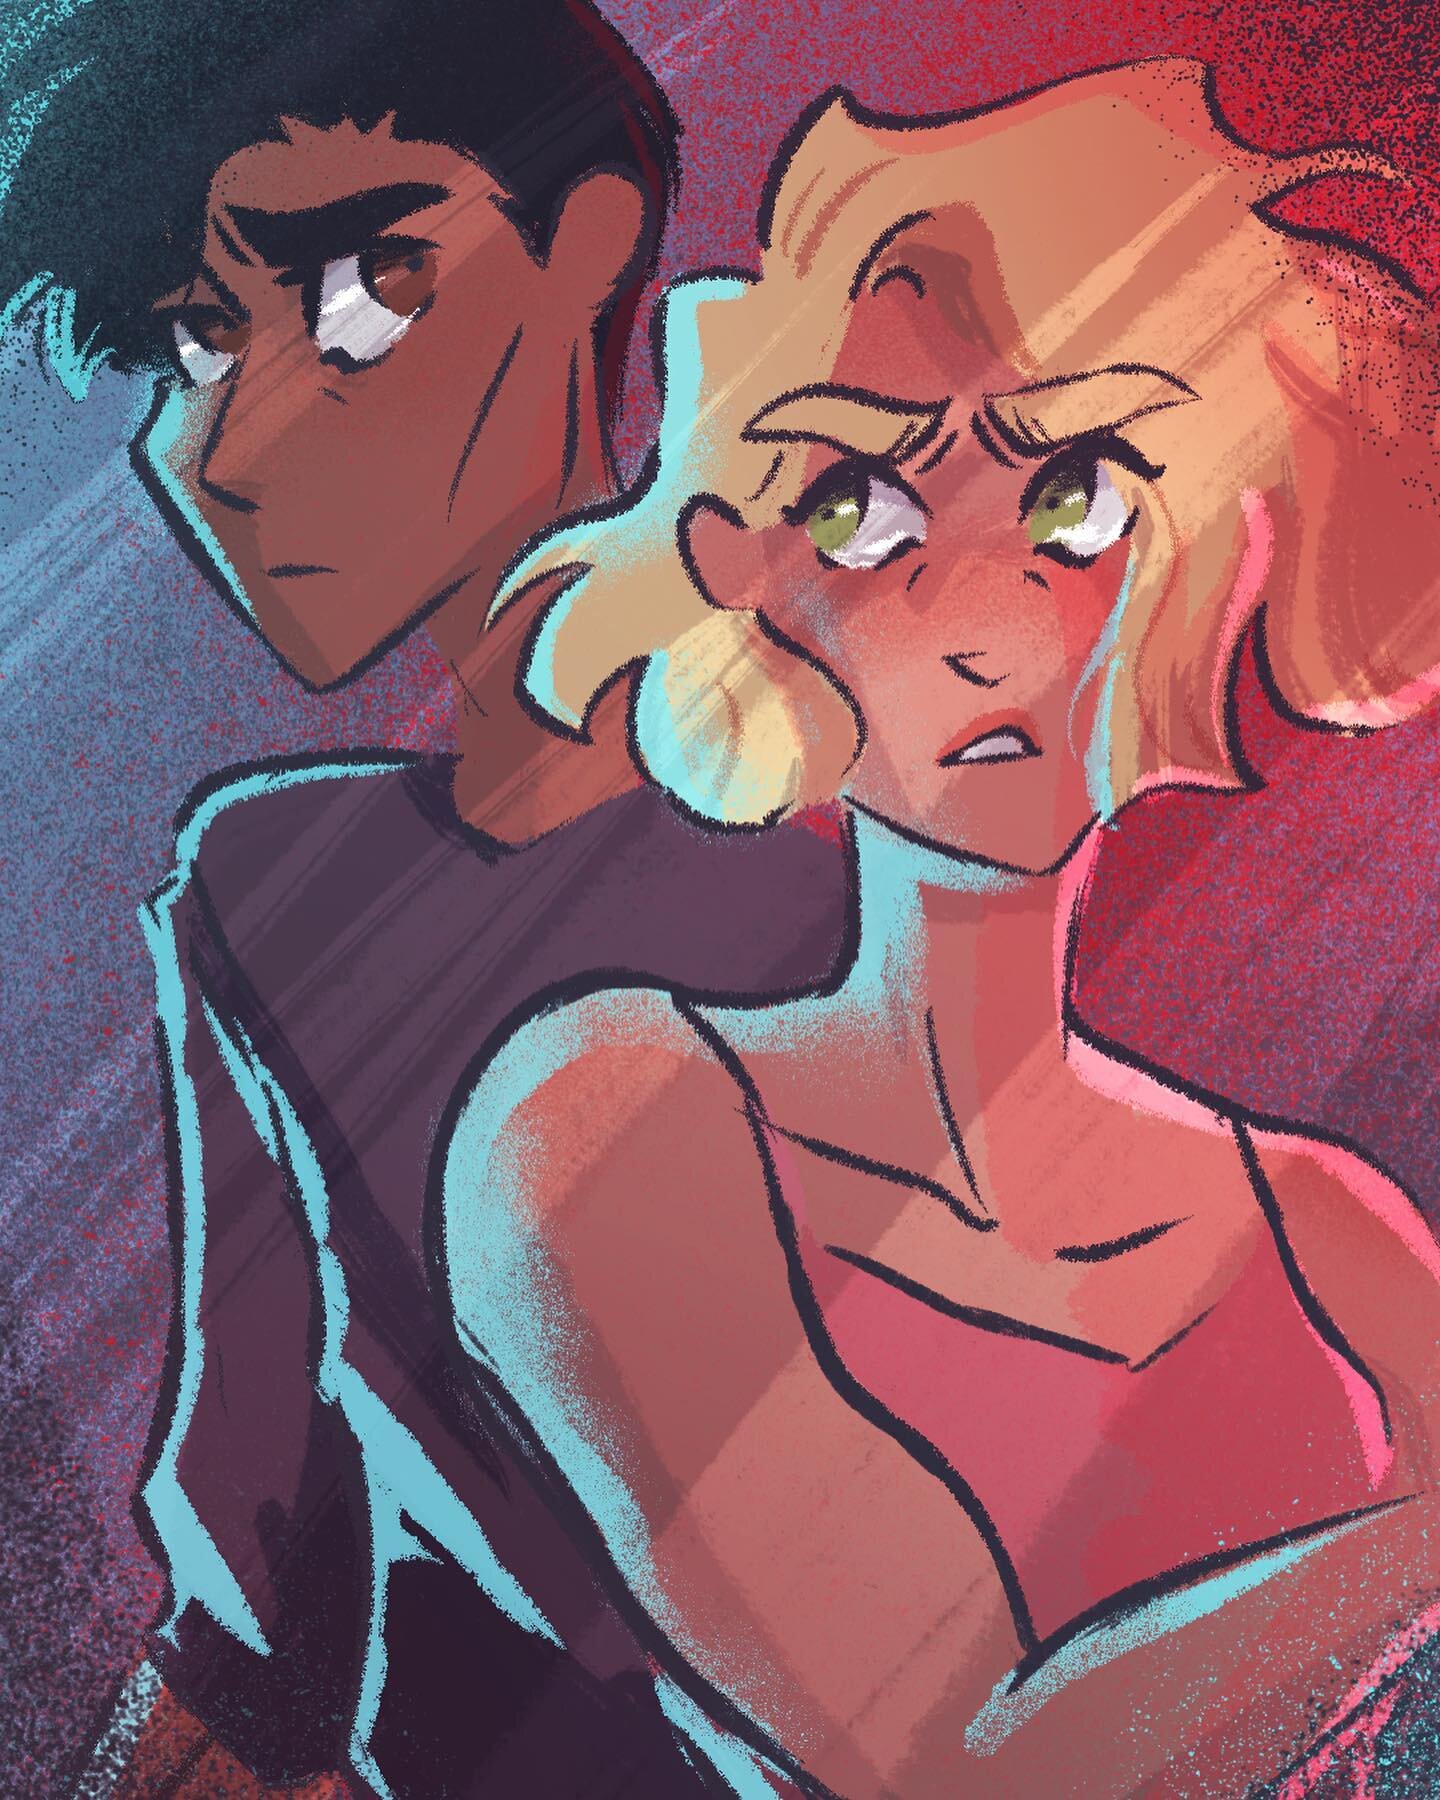 More Aaron and Gayle in fun lighting ✨ my episode for Webtoon&rsquo;s Call to Action contest will only be up temporarily, so don&rsquo;t forget to give it a read (link in bio)
.
.
.
#webtoon #webtooncanvas #webcomic #oc #ocs #seeingred